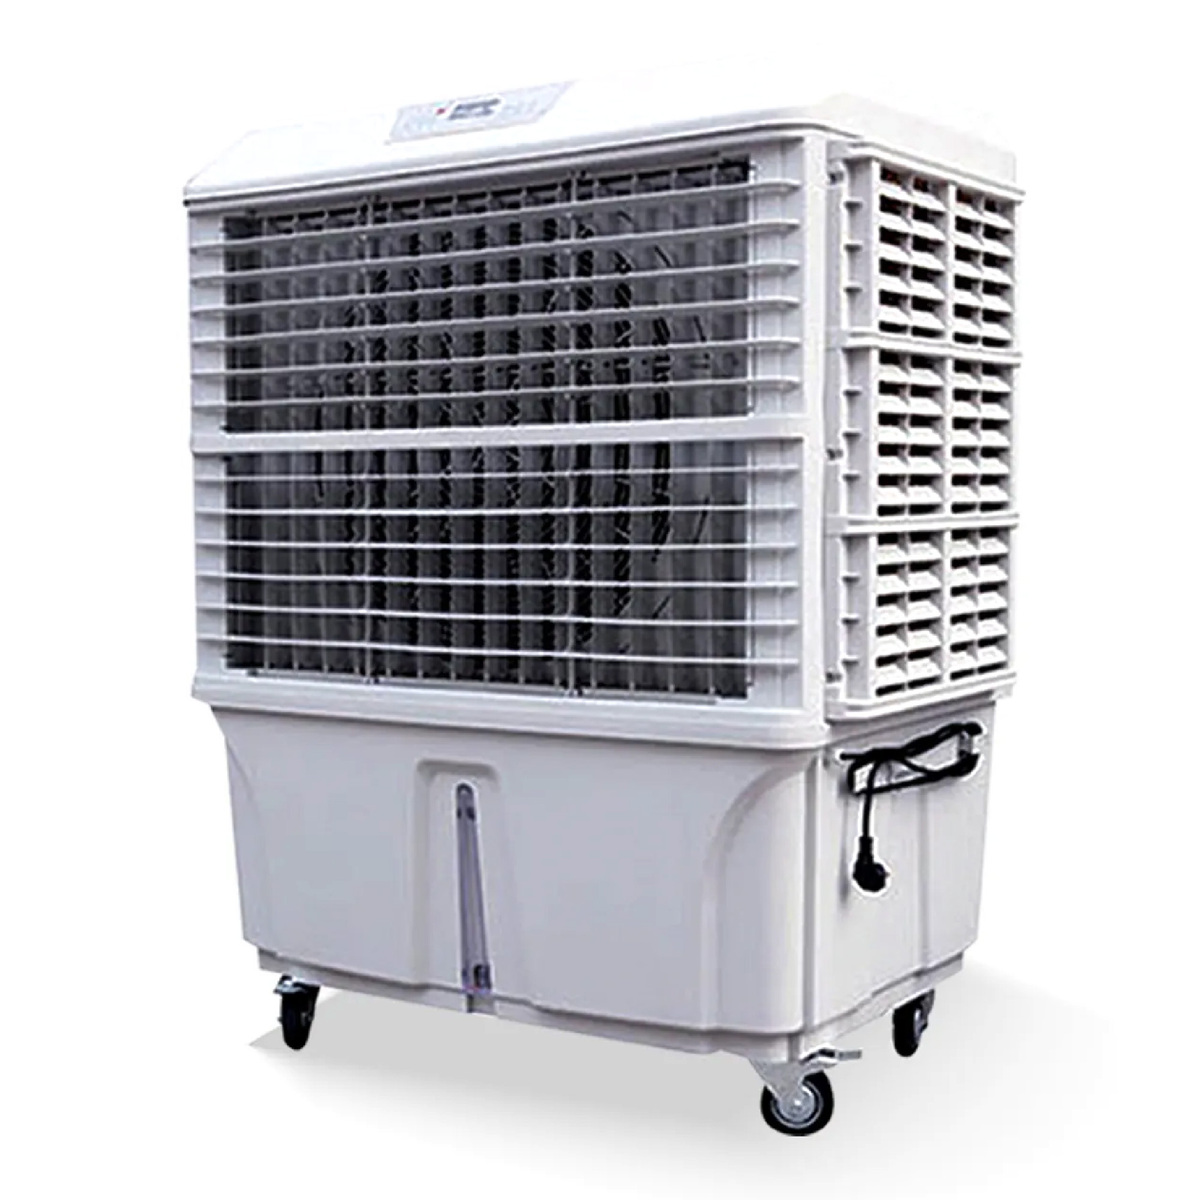 General Cool Generalco Air Cooler HNY18 130Ltr